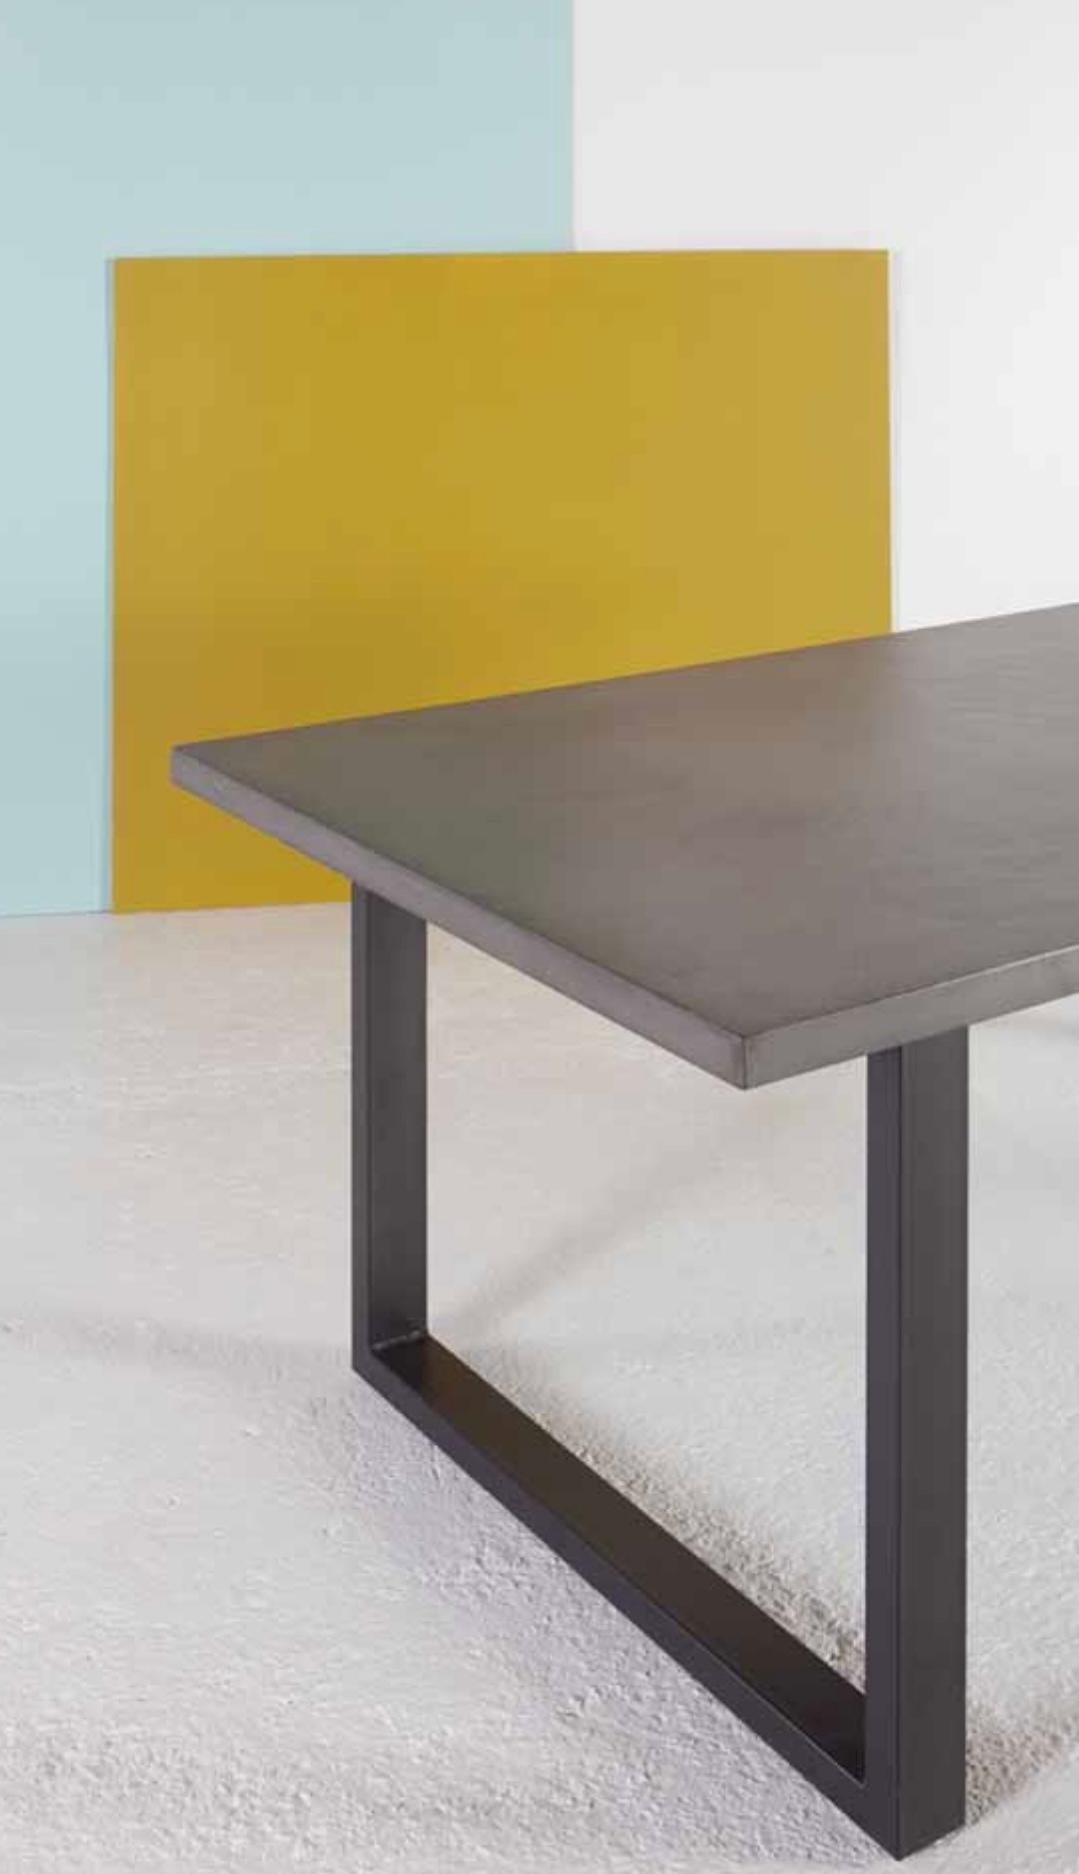 Modern Handmade Dining Table, Made of Concrete, Handcrafted by French Designer